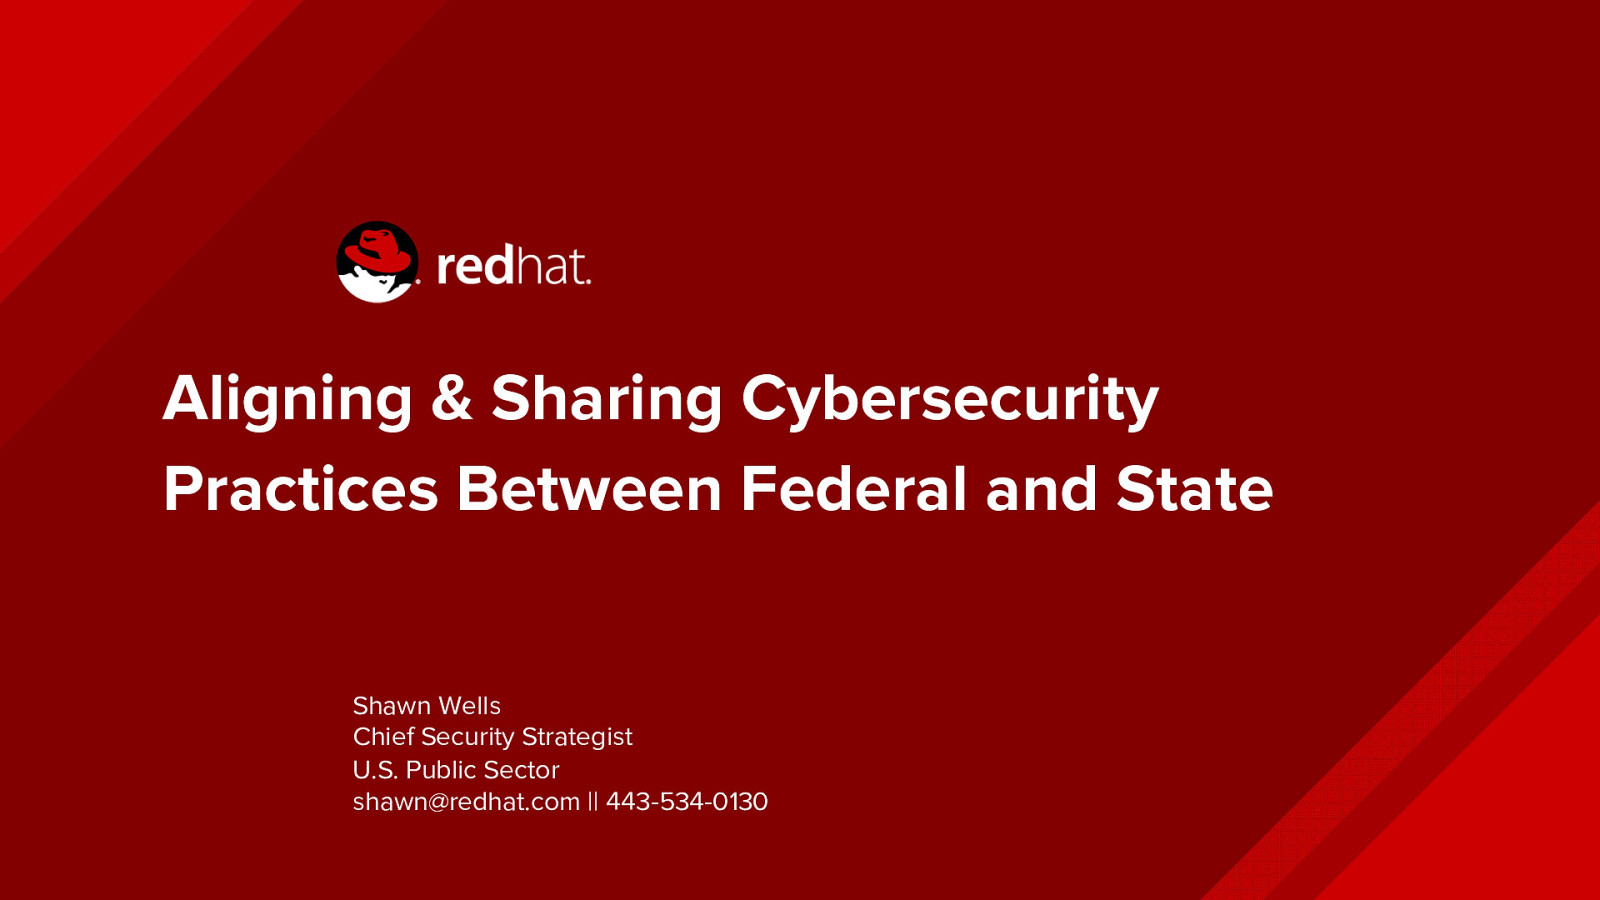 Aligning and Sharing Cybersecurity Practices Between Federal and State Government